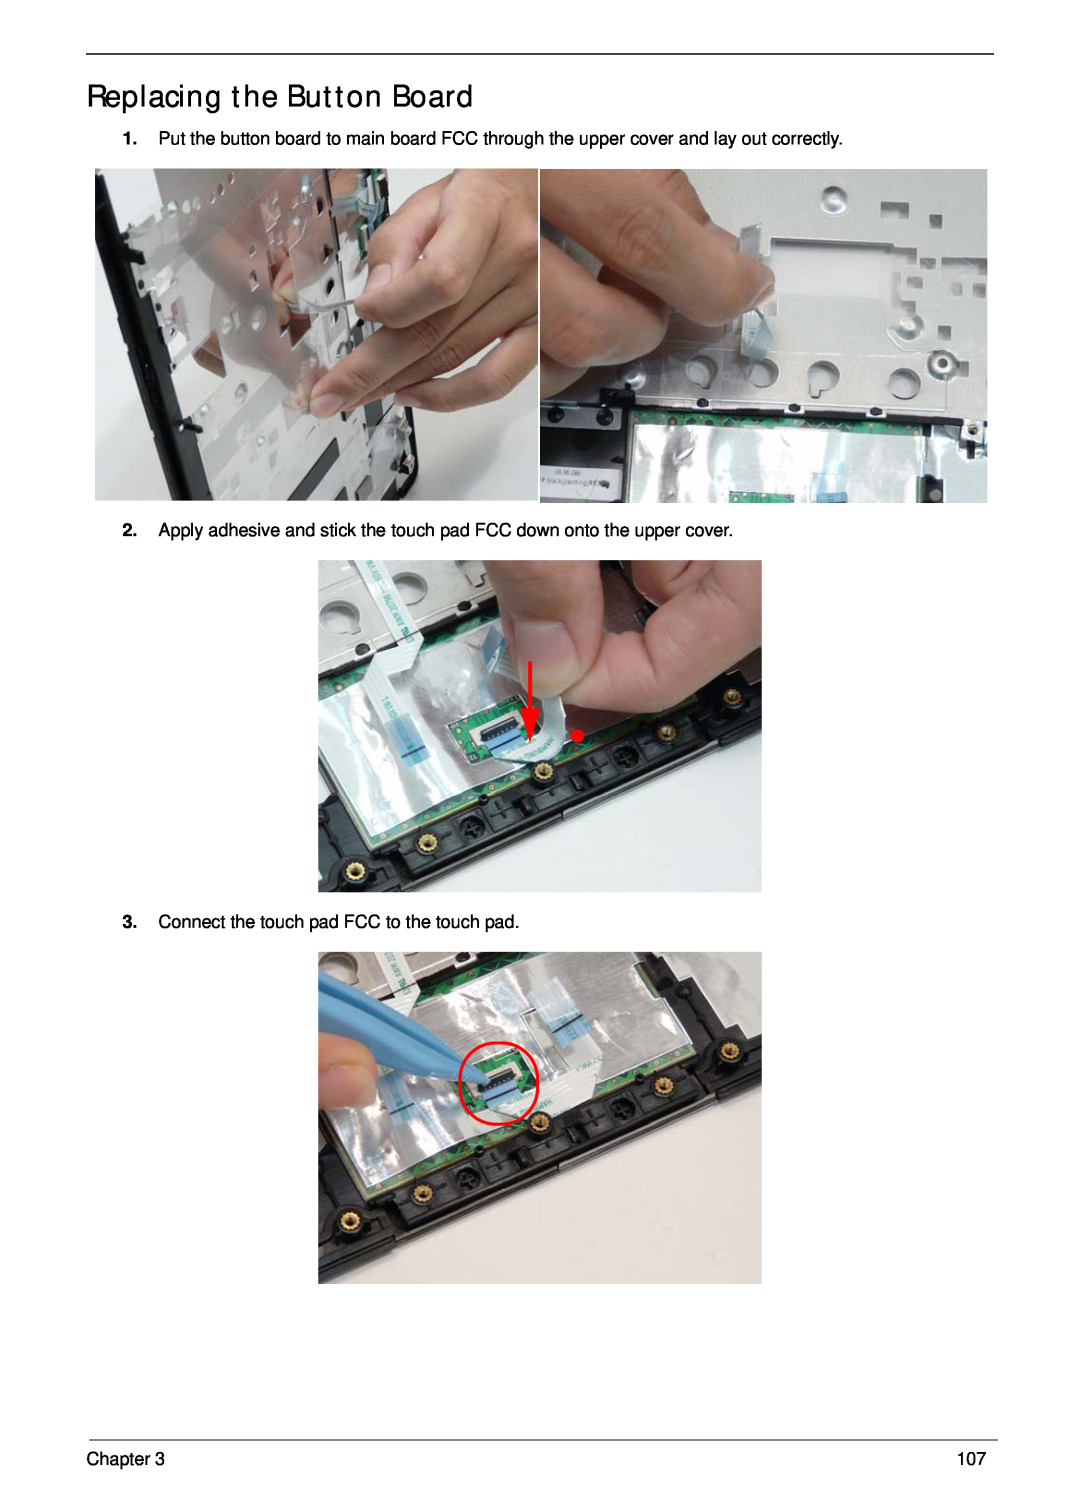 Gateway EC14 manual Replacing the Button Board, Connect the touch pad FCC to the touch pad, Chapter 